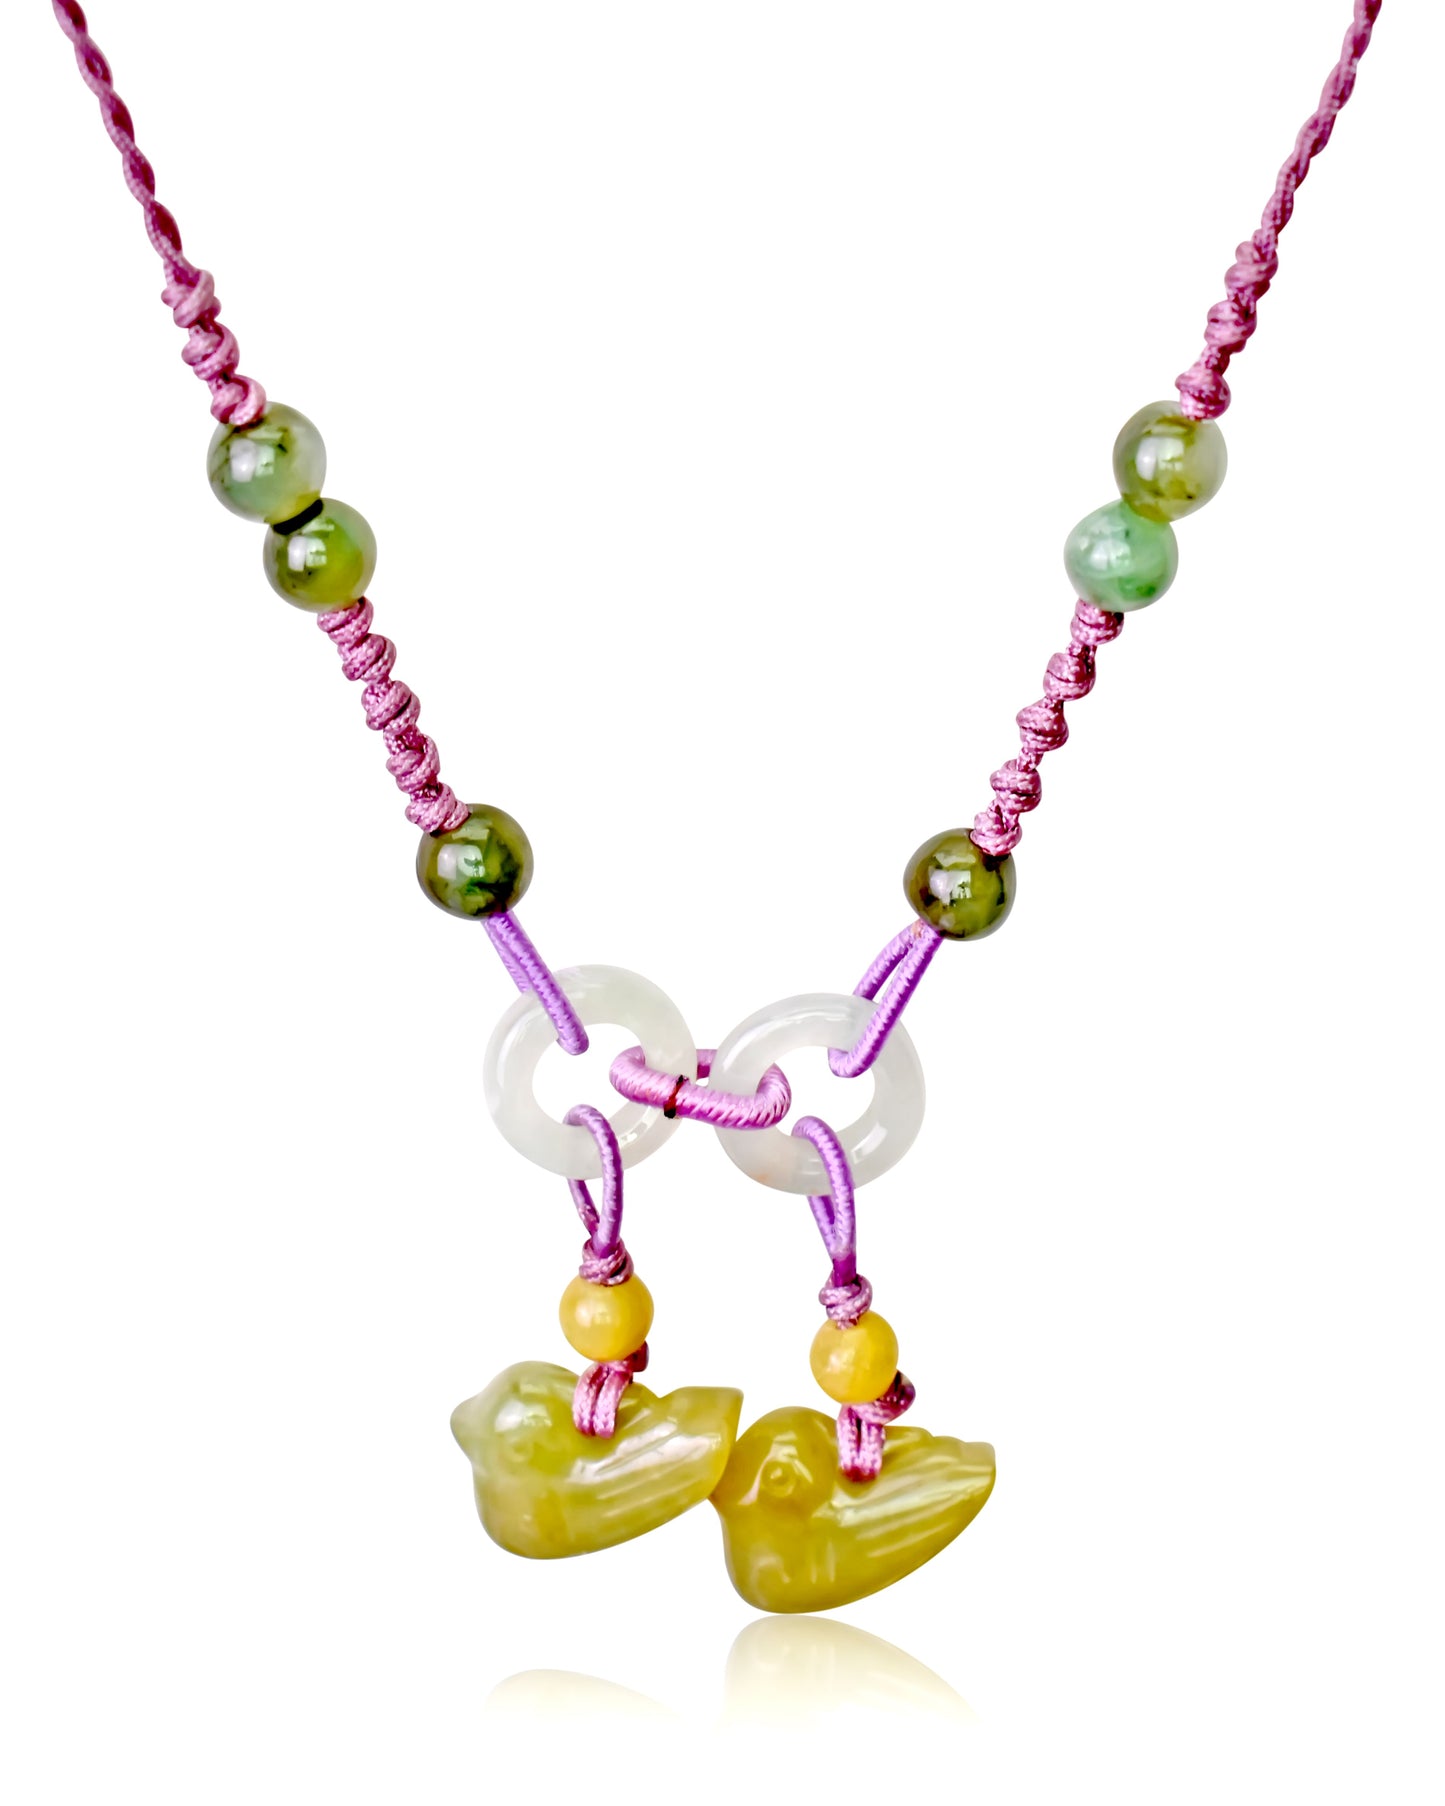 Feel Your Inner Strength with Charming Doves Jade Necklace made with Lavender Cord